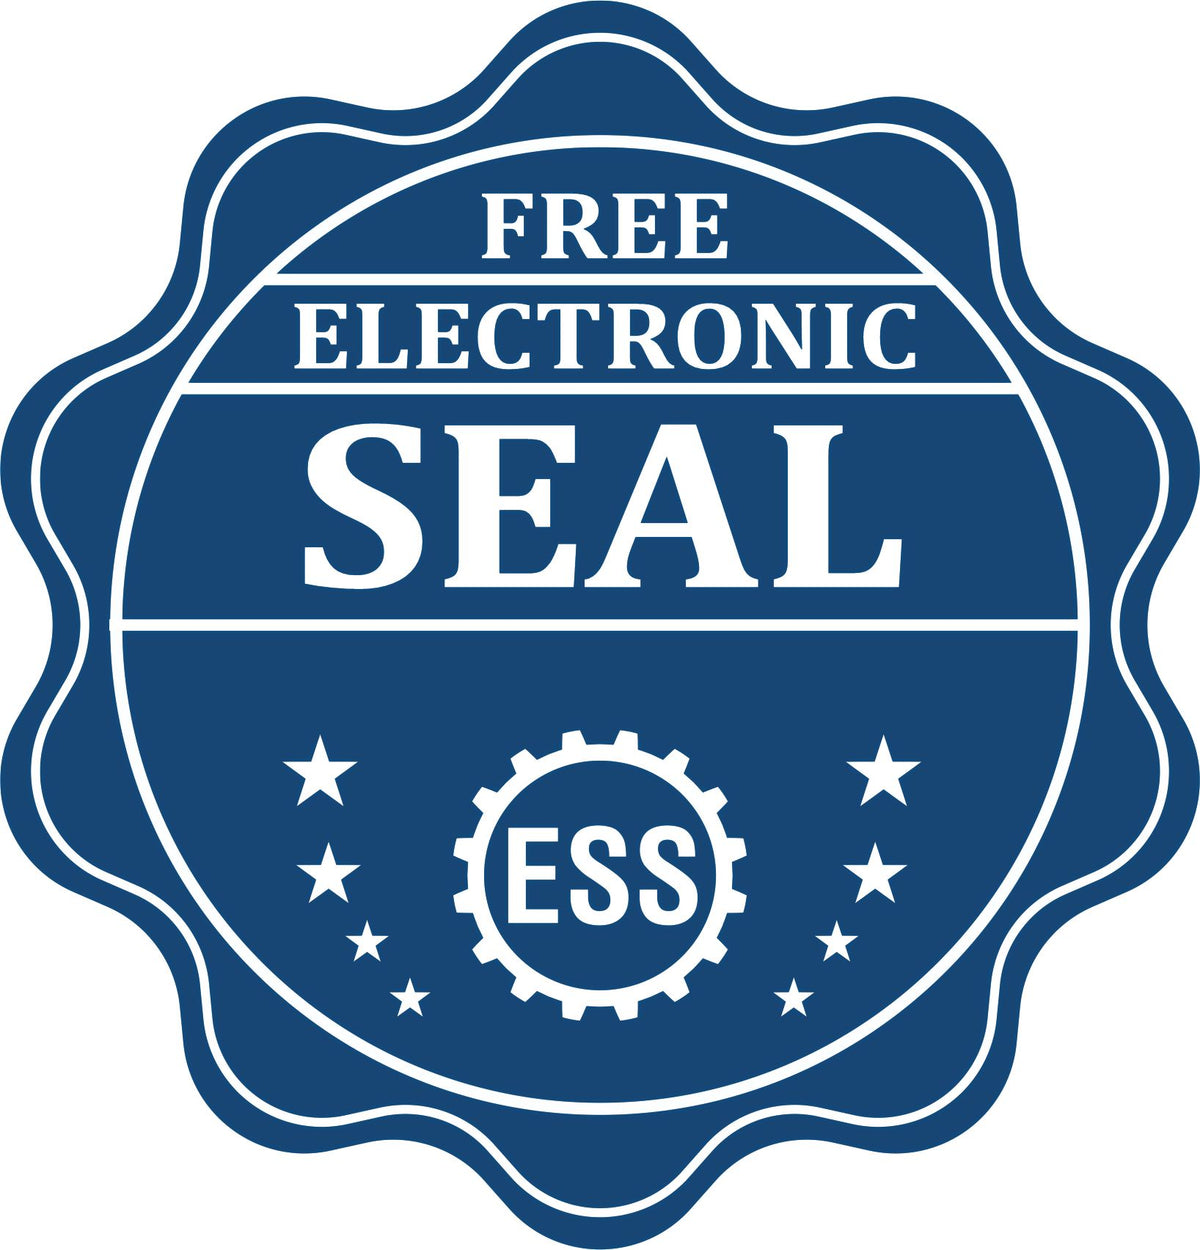 A badge showing a free electronic seal for the Soft Pocket Mississippi Landscape Architect Embosser with stars and the ESS gear on the emblem.